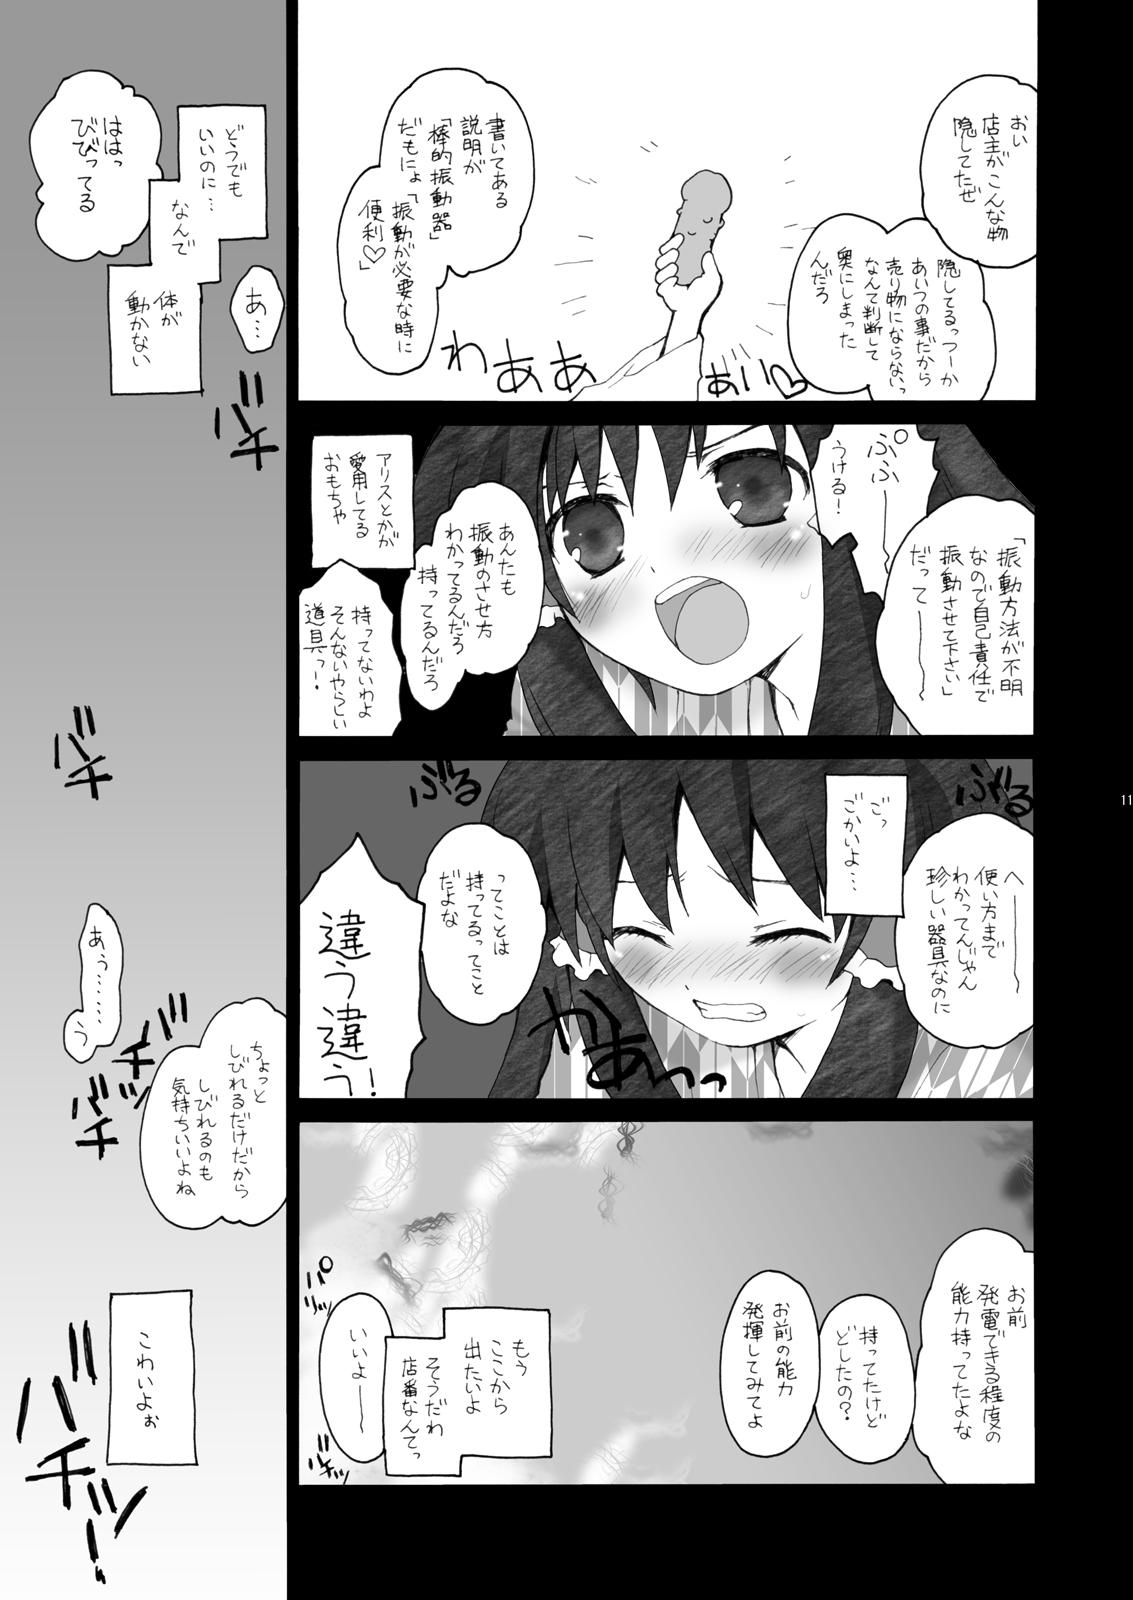 Huge けしからん娘達～あるお店の一日総集編～ - Touhou project Sixtynine - Page 9